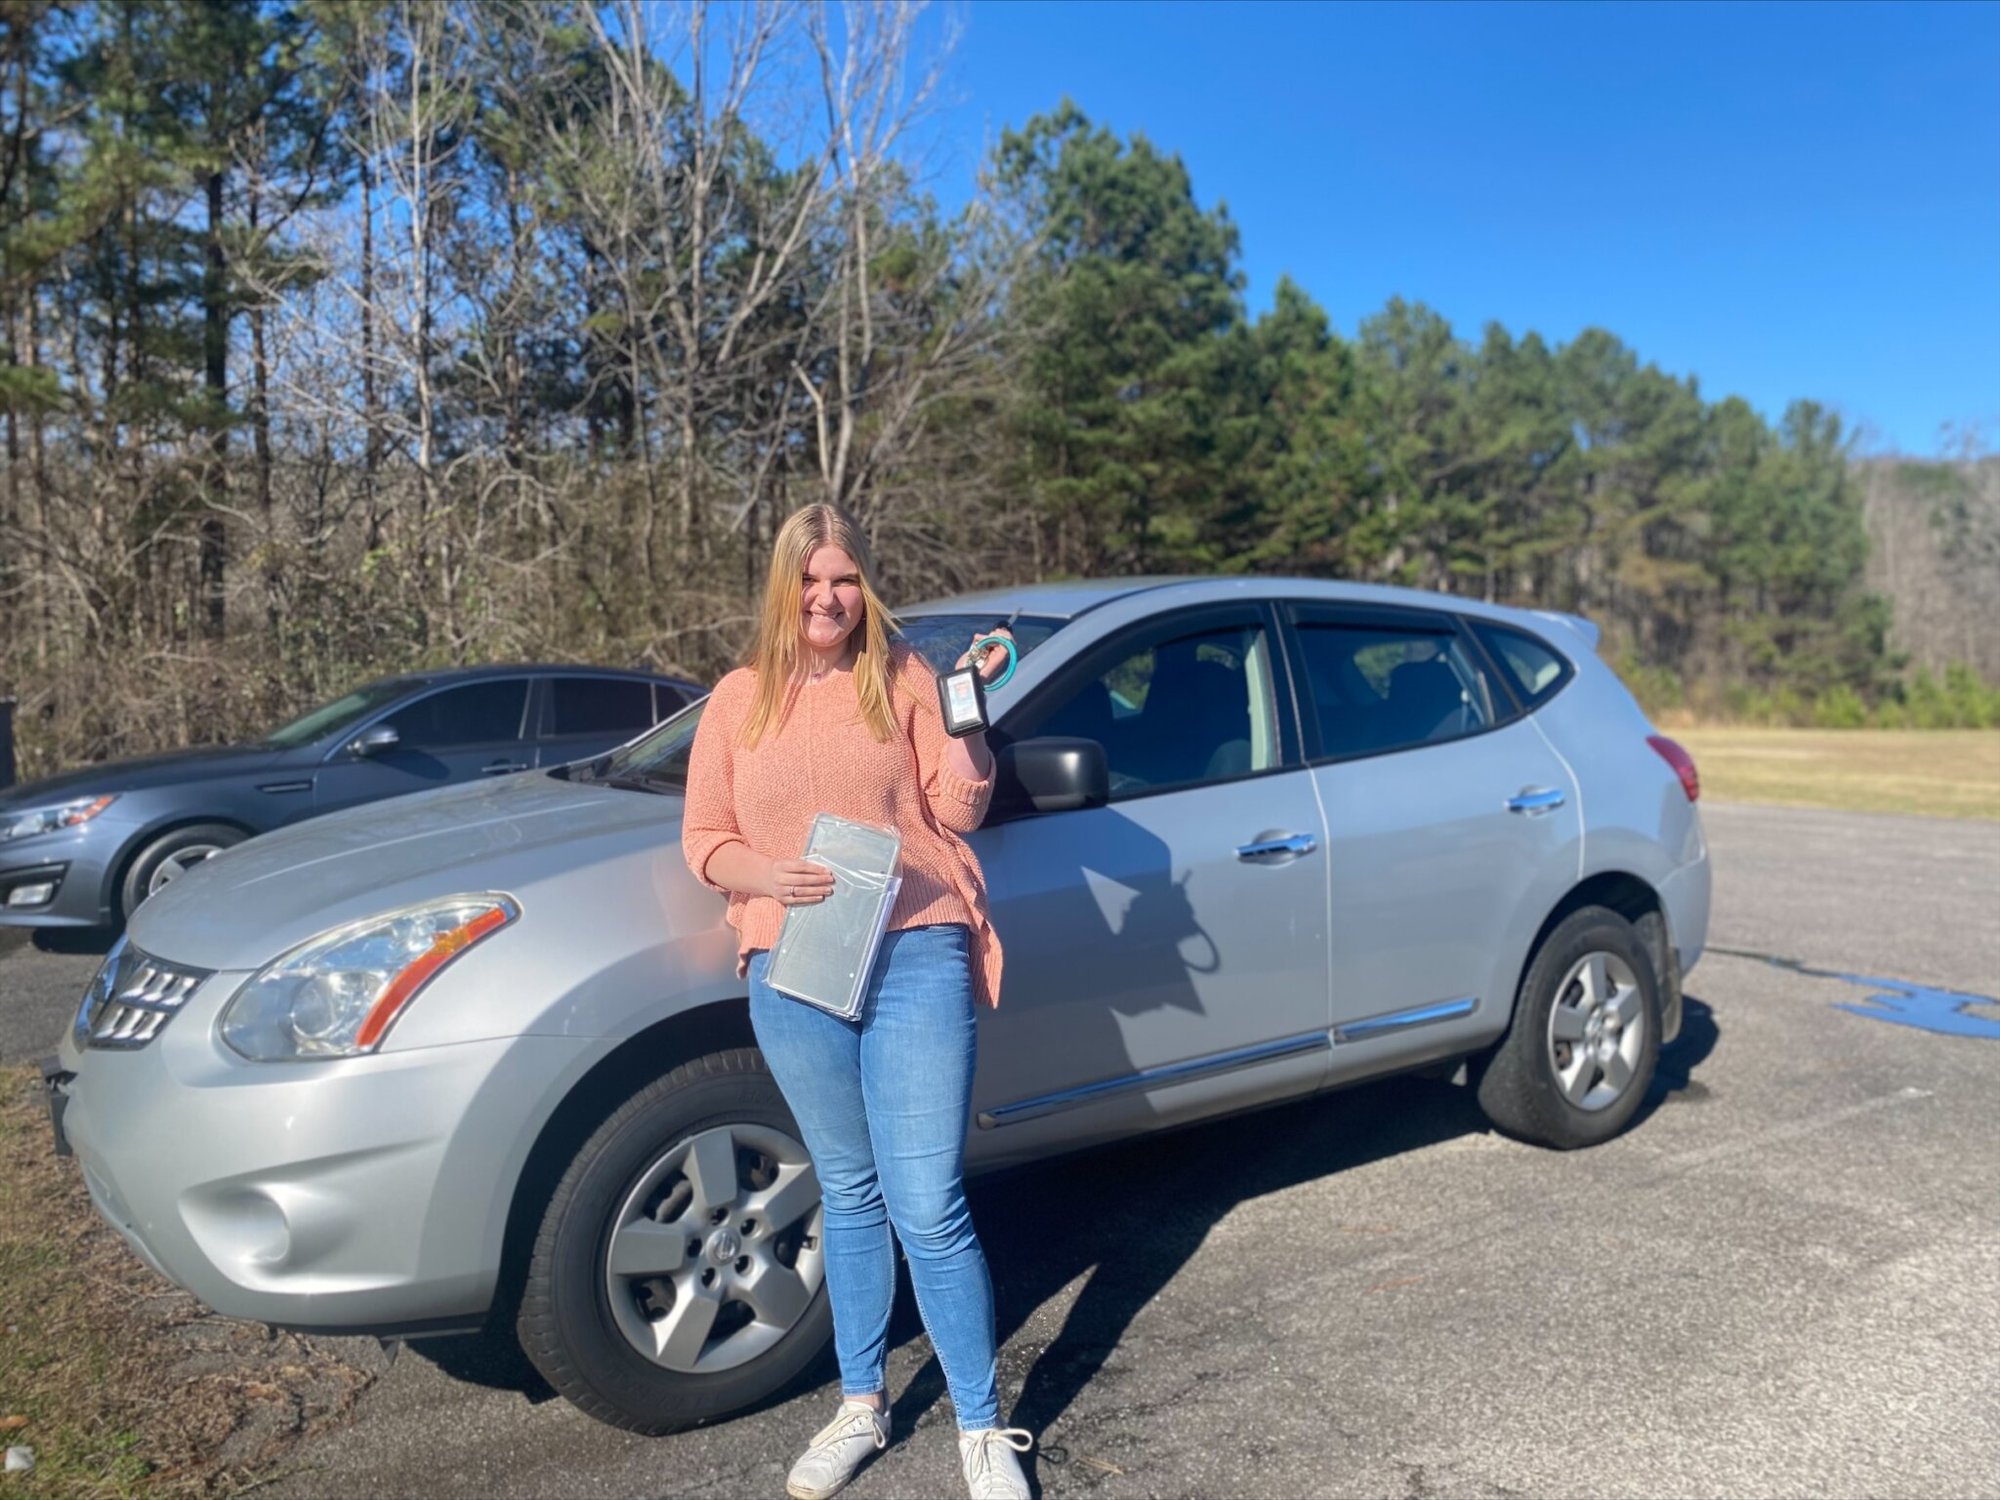 Macey purchasing her first car. We are so proud of you!